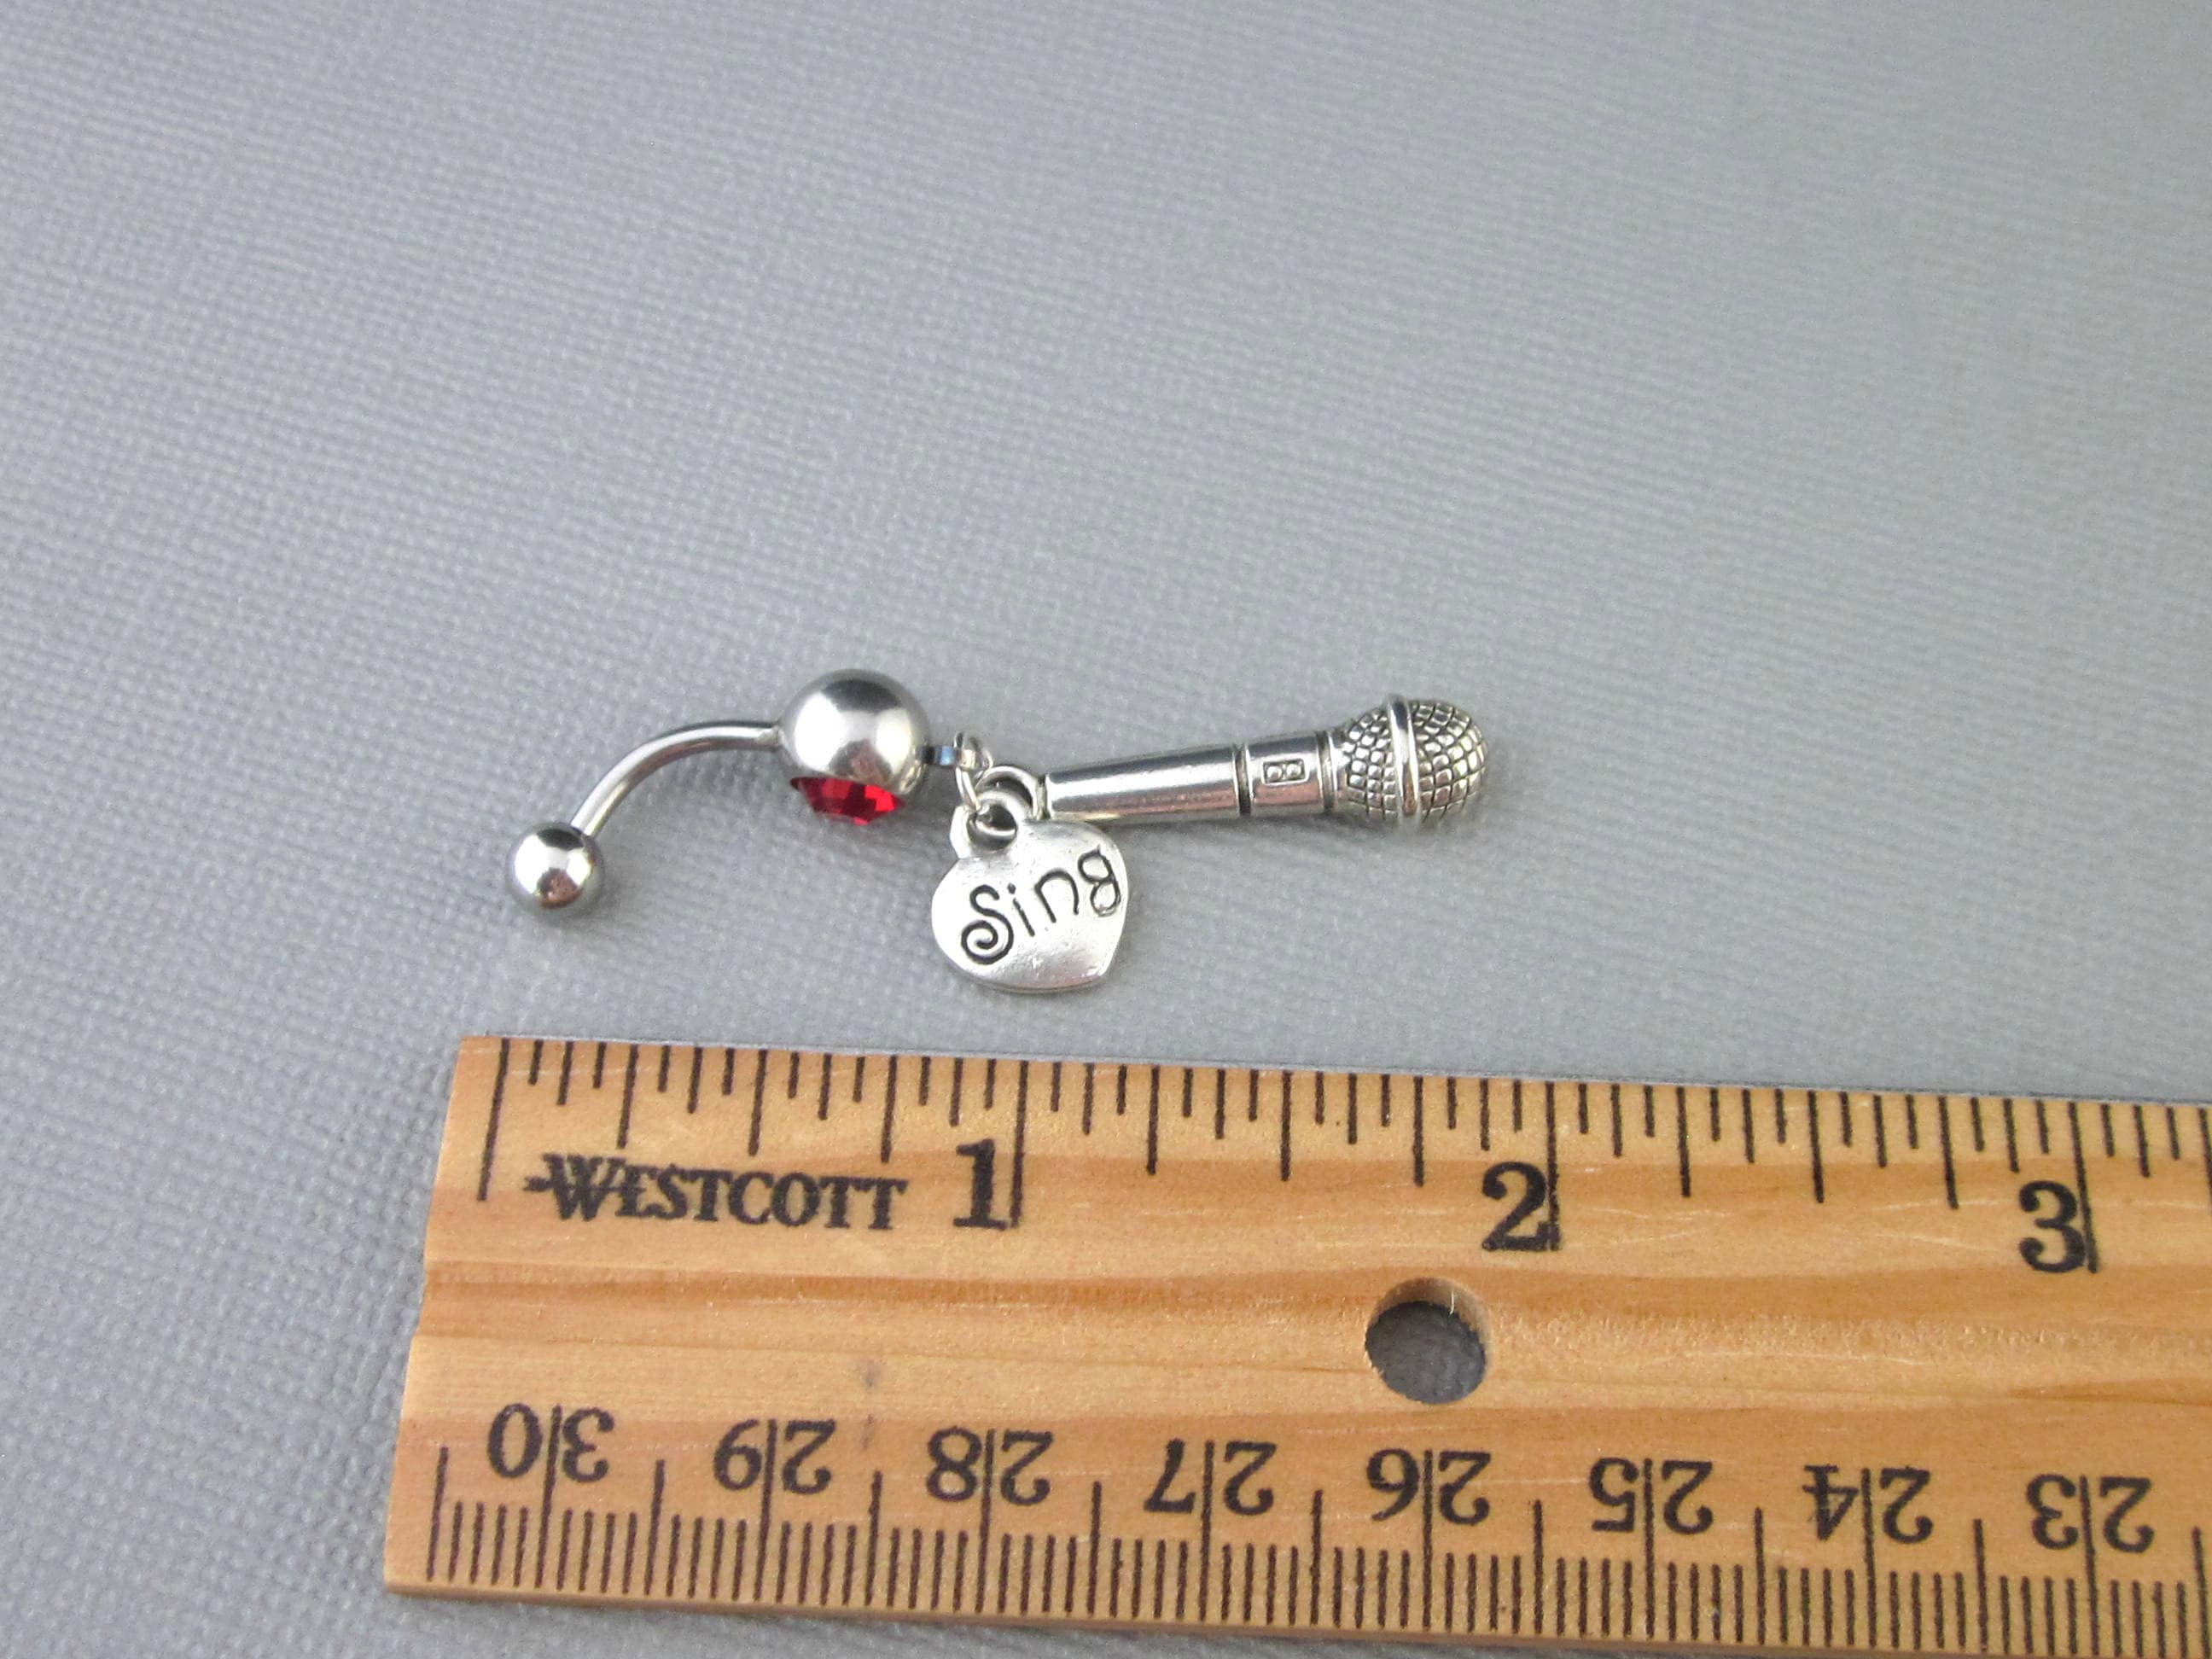 Microphone MIC Drop Voice Belly Button Navel Ring Body Jewelry Piercing Singer #IS-718